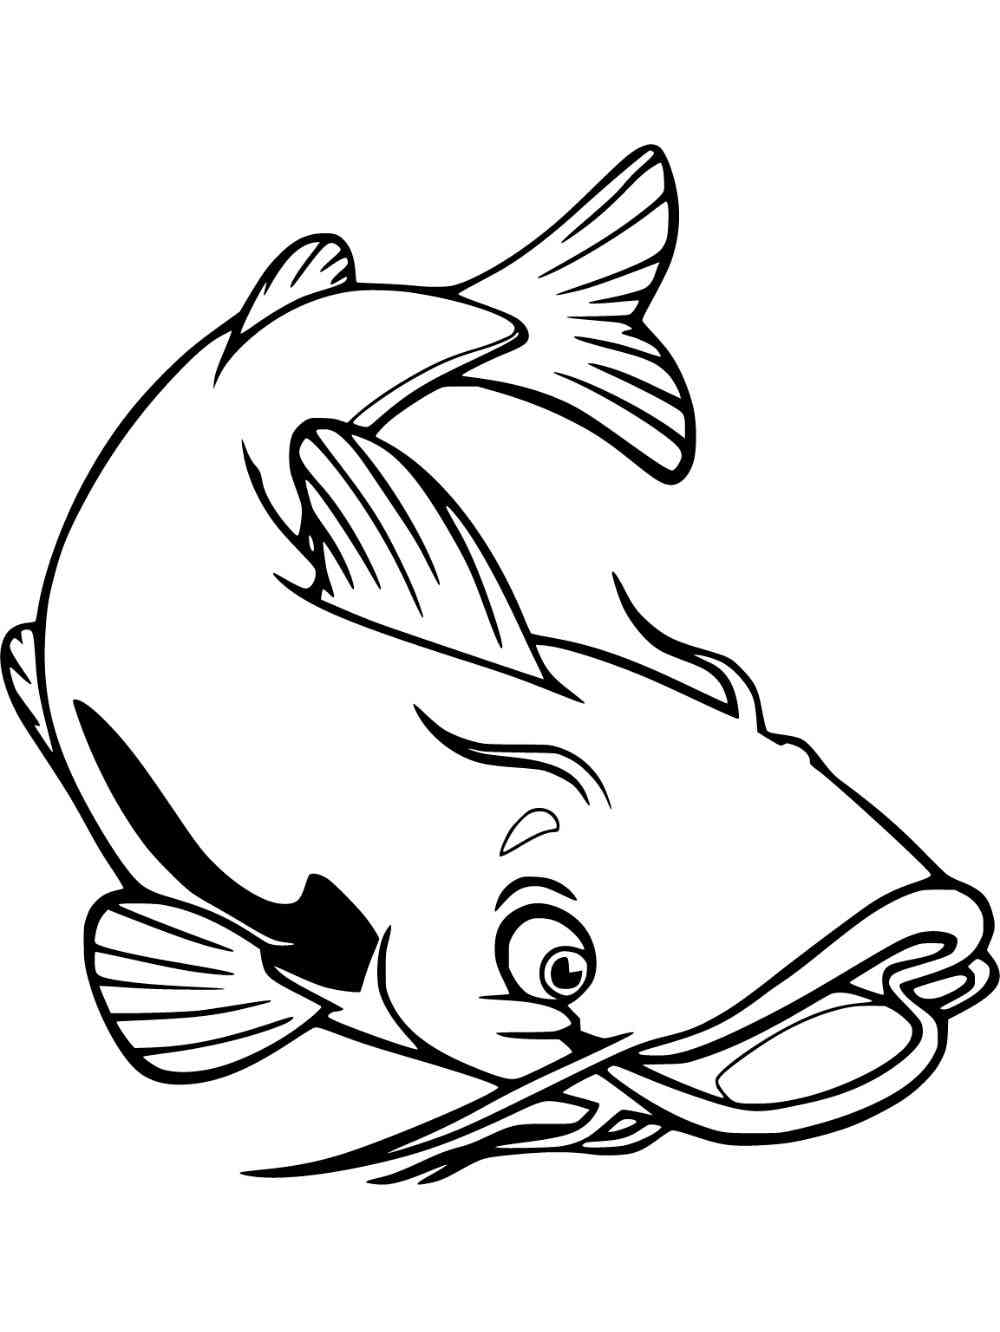 Catfish smiles coloring page